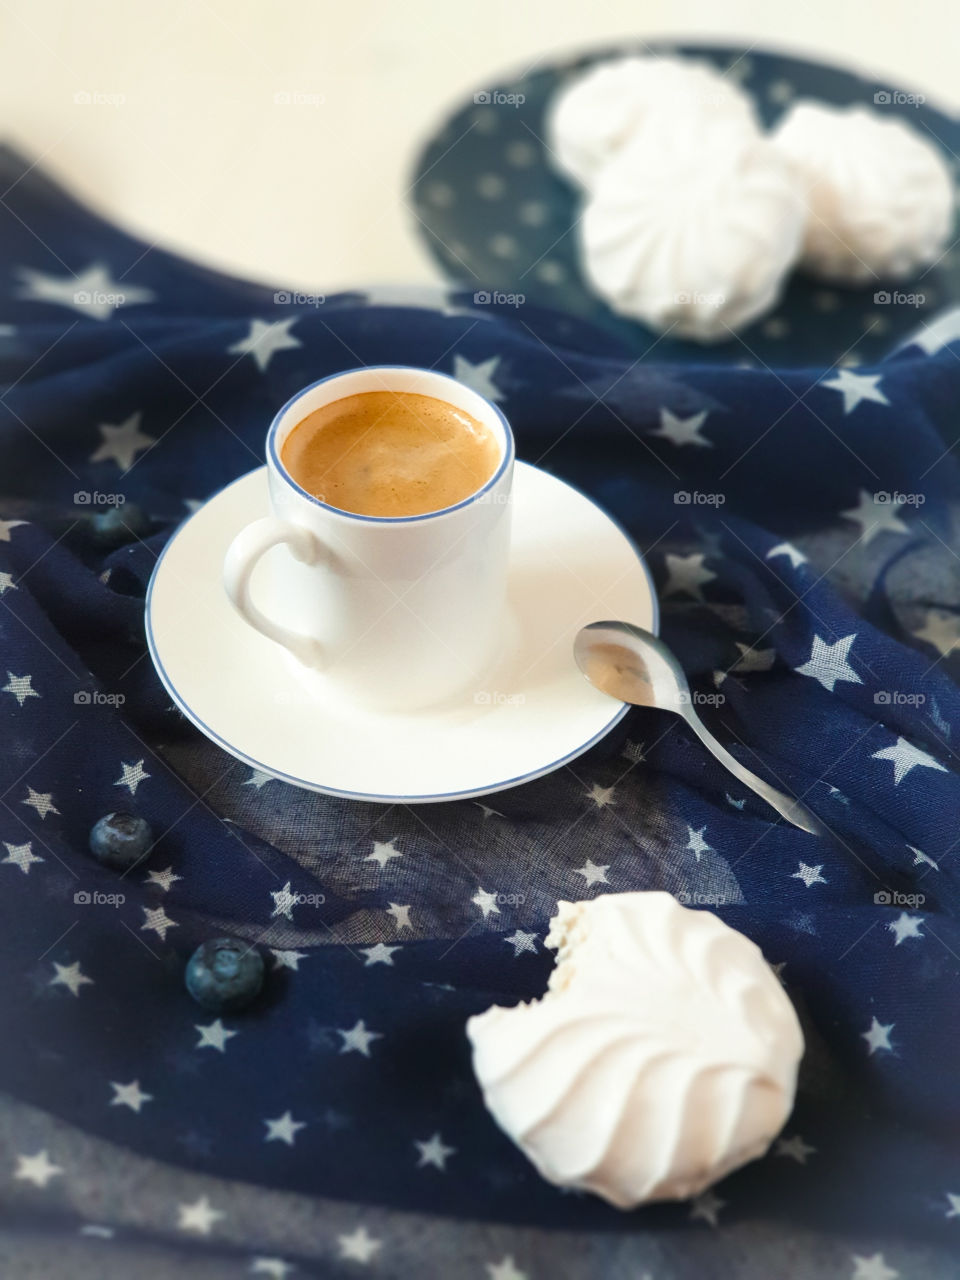 Freshly brewed coffee with white marshmallows on a blue textile tablecloth with stars.  A sweet snack with a cup of espresso.  A nice start to the day